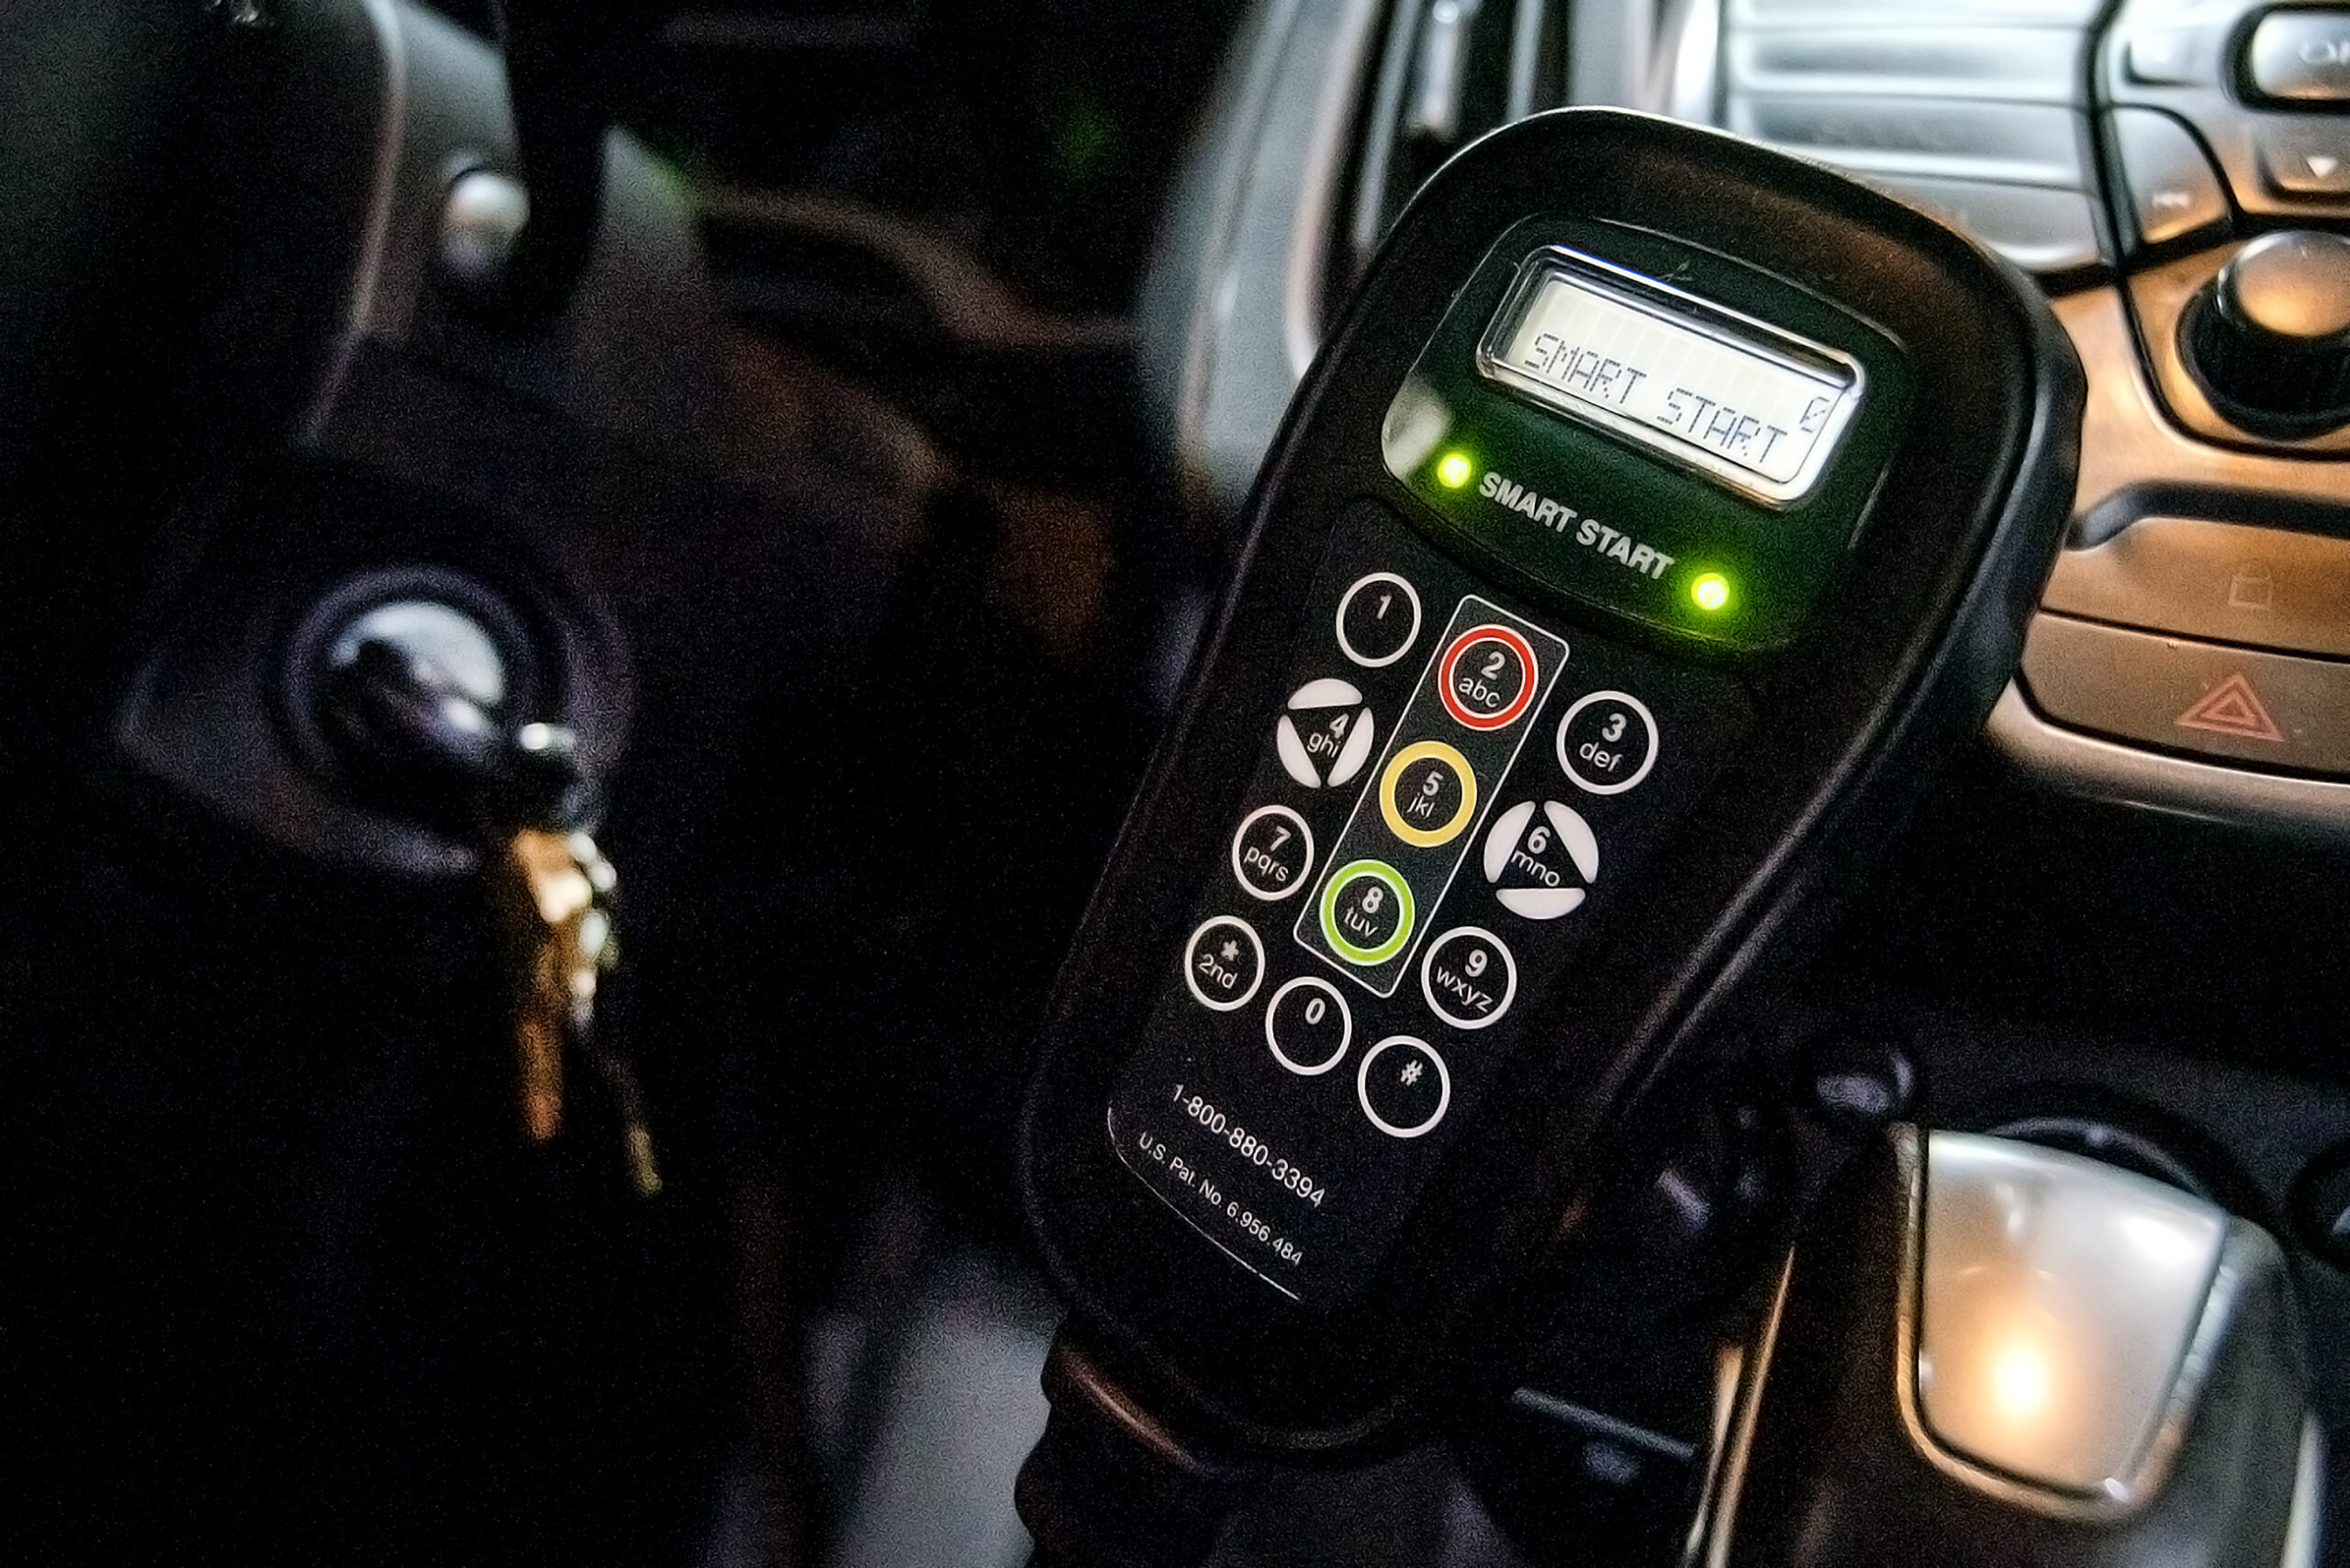 A device with a keypad and a screen is installed near the ignition of a car.